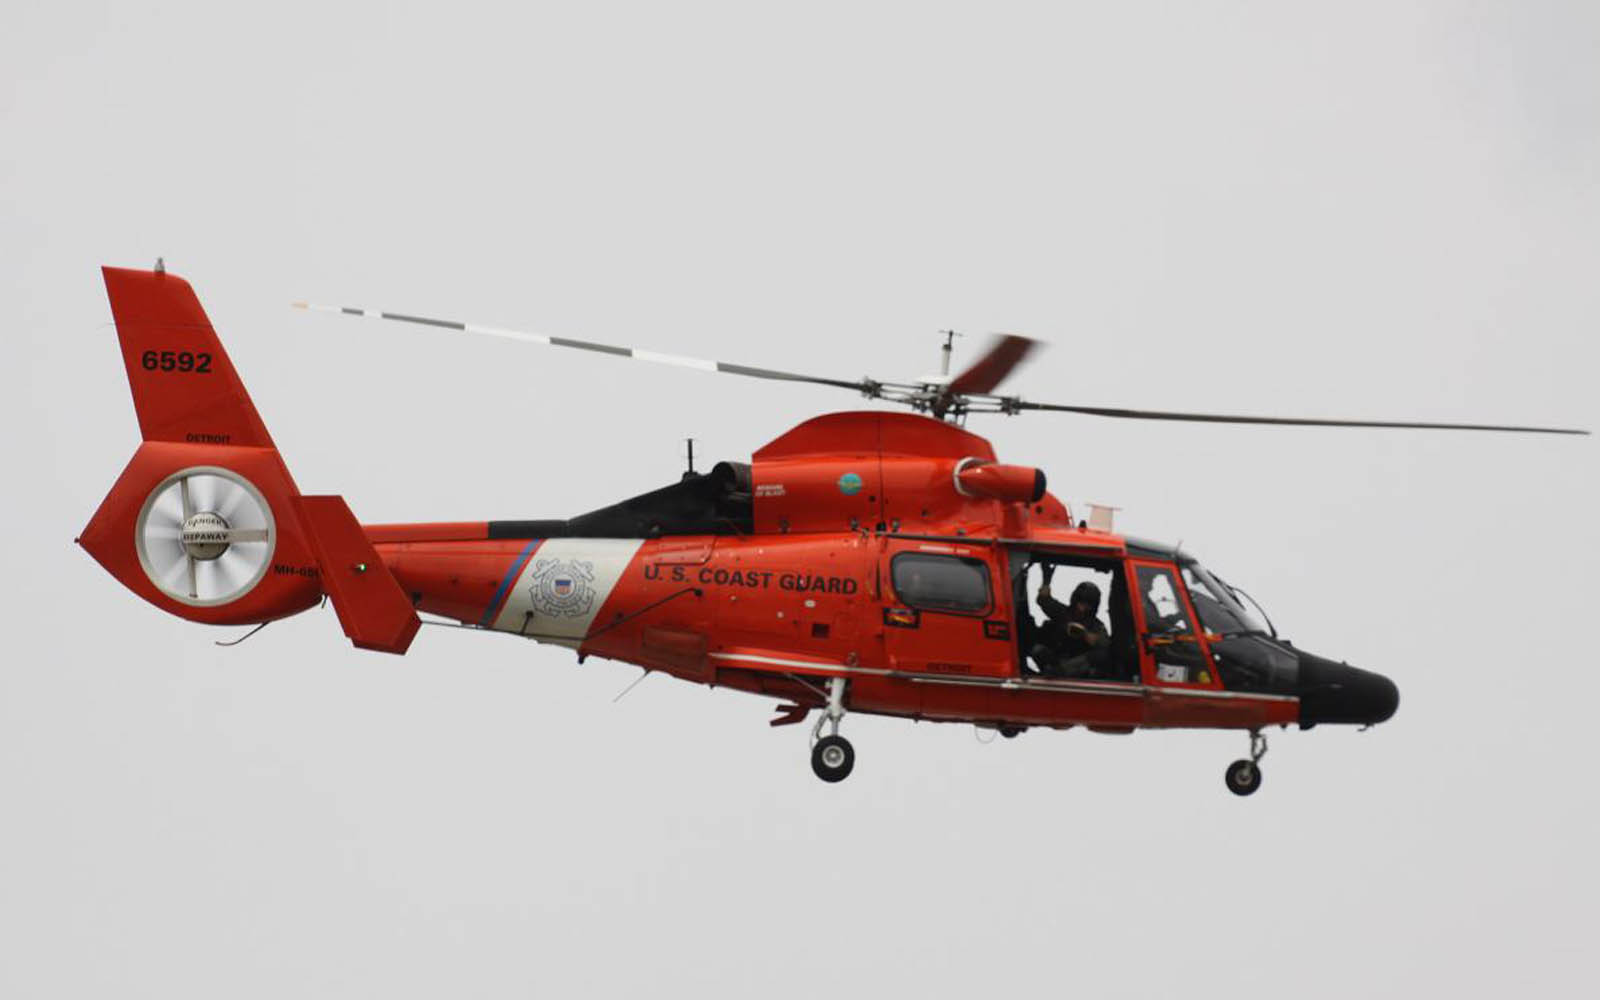 wallpapers HH 65 Dolphin US Coast Guard Helicopter Wallpapers